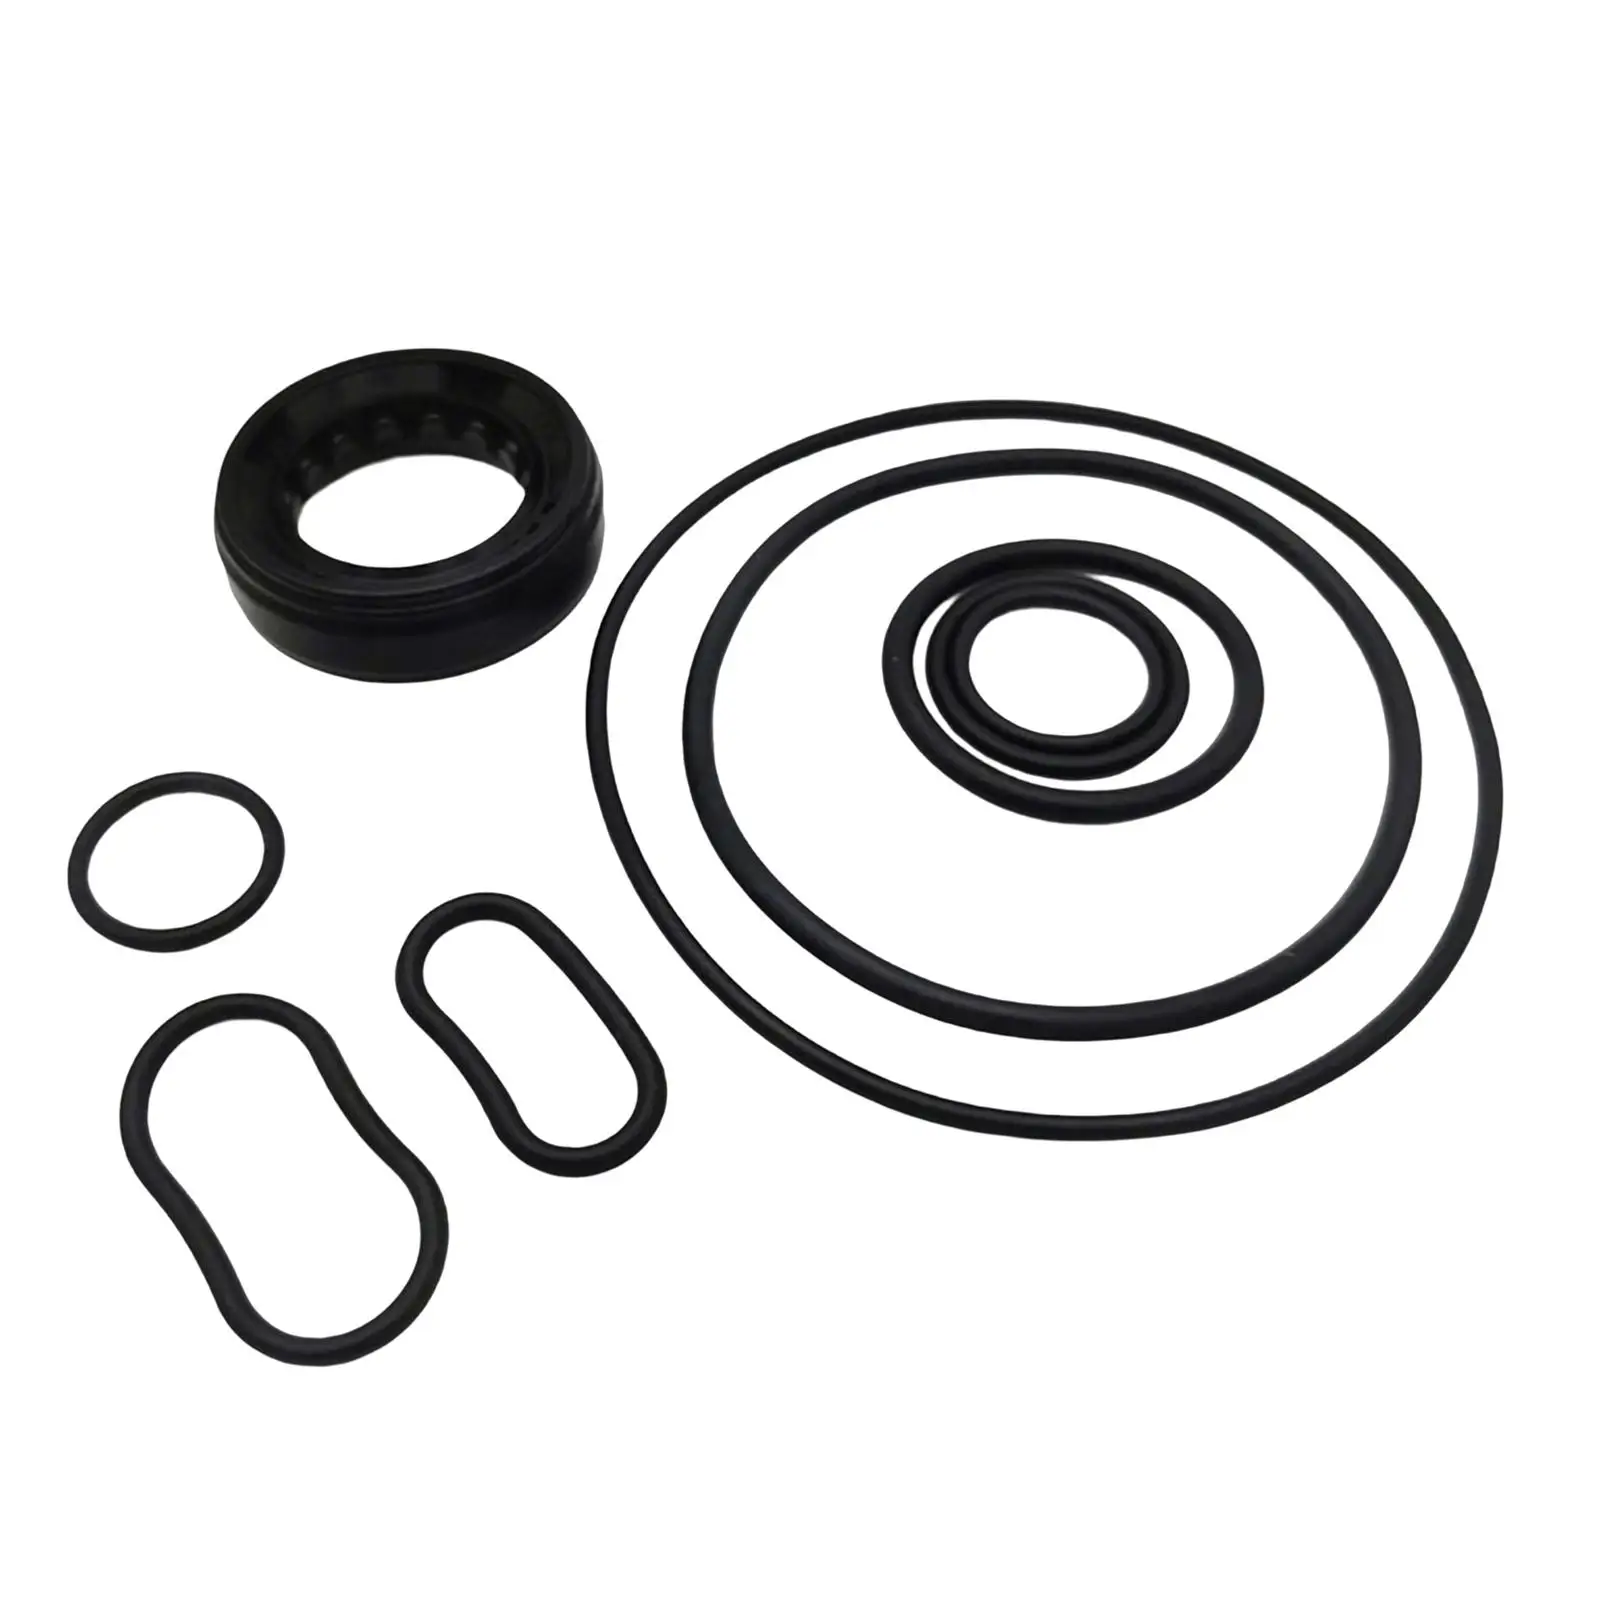 Power Steering Pump Seal Kit 06539-Pnc-003 Replacement Vehicle Professional Auto with O Rings for   2003-2007